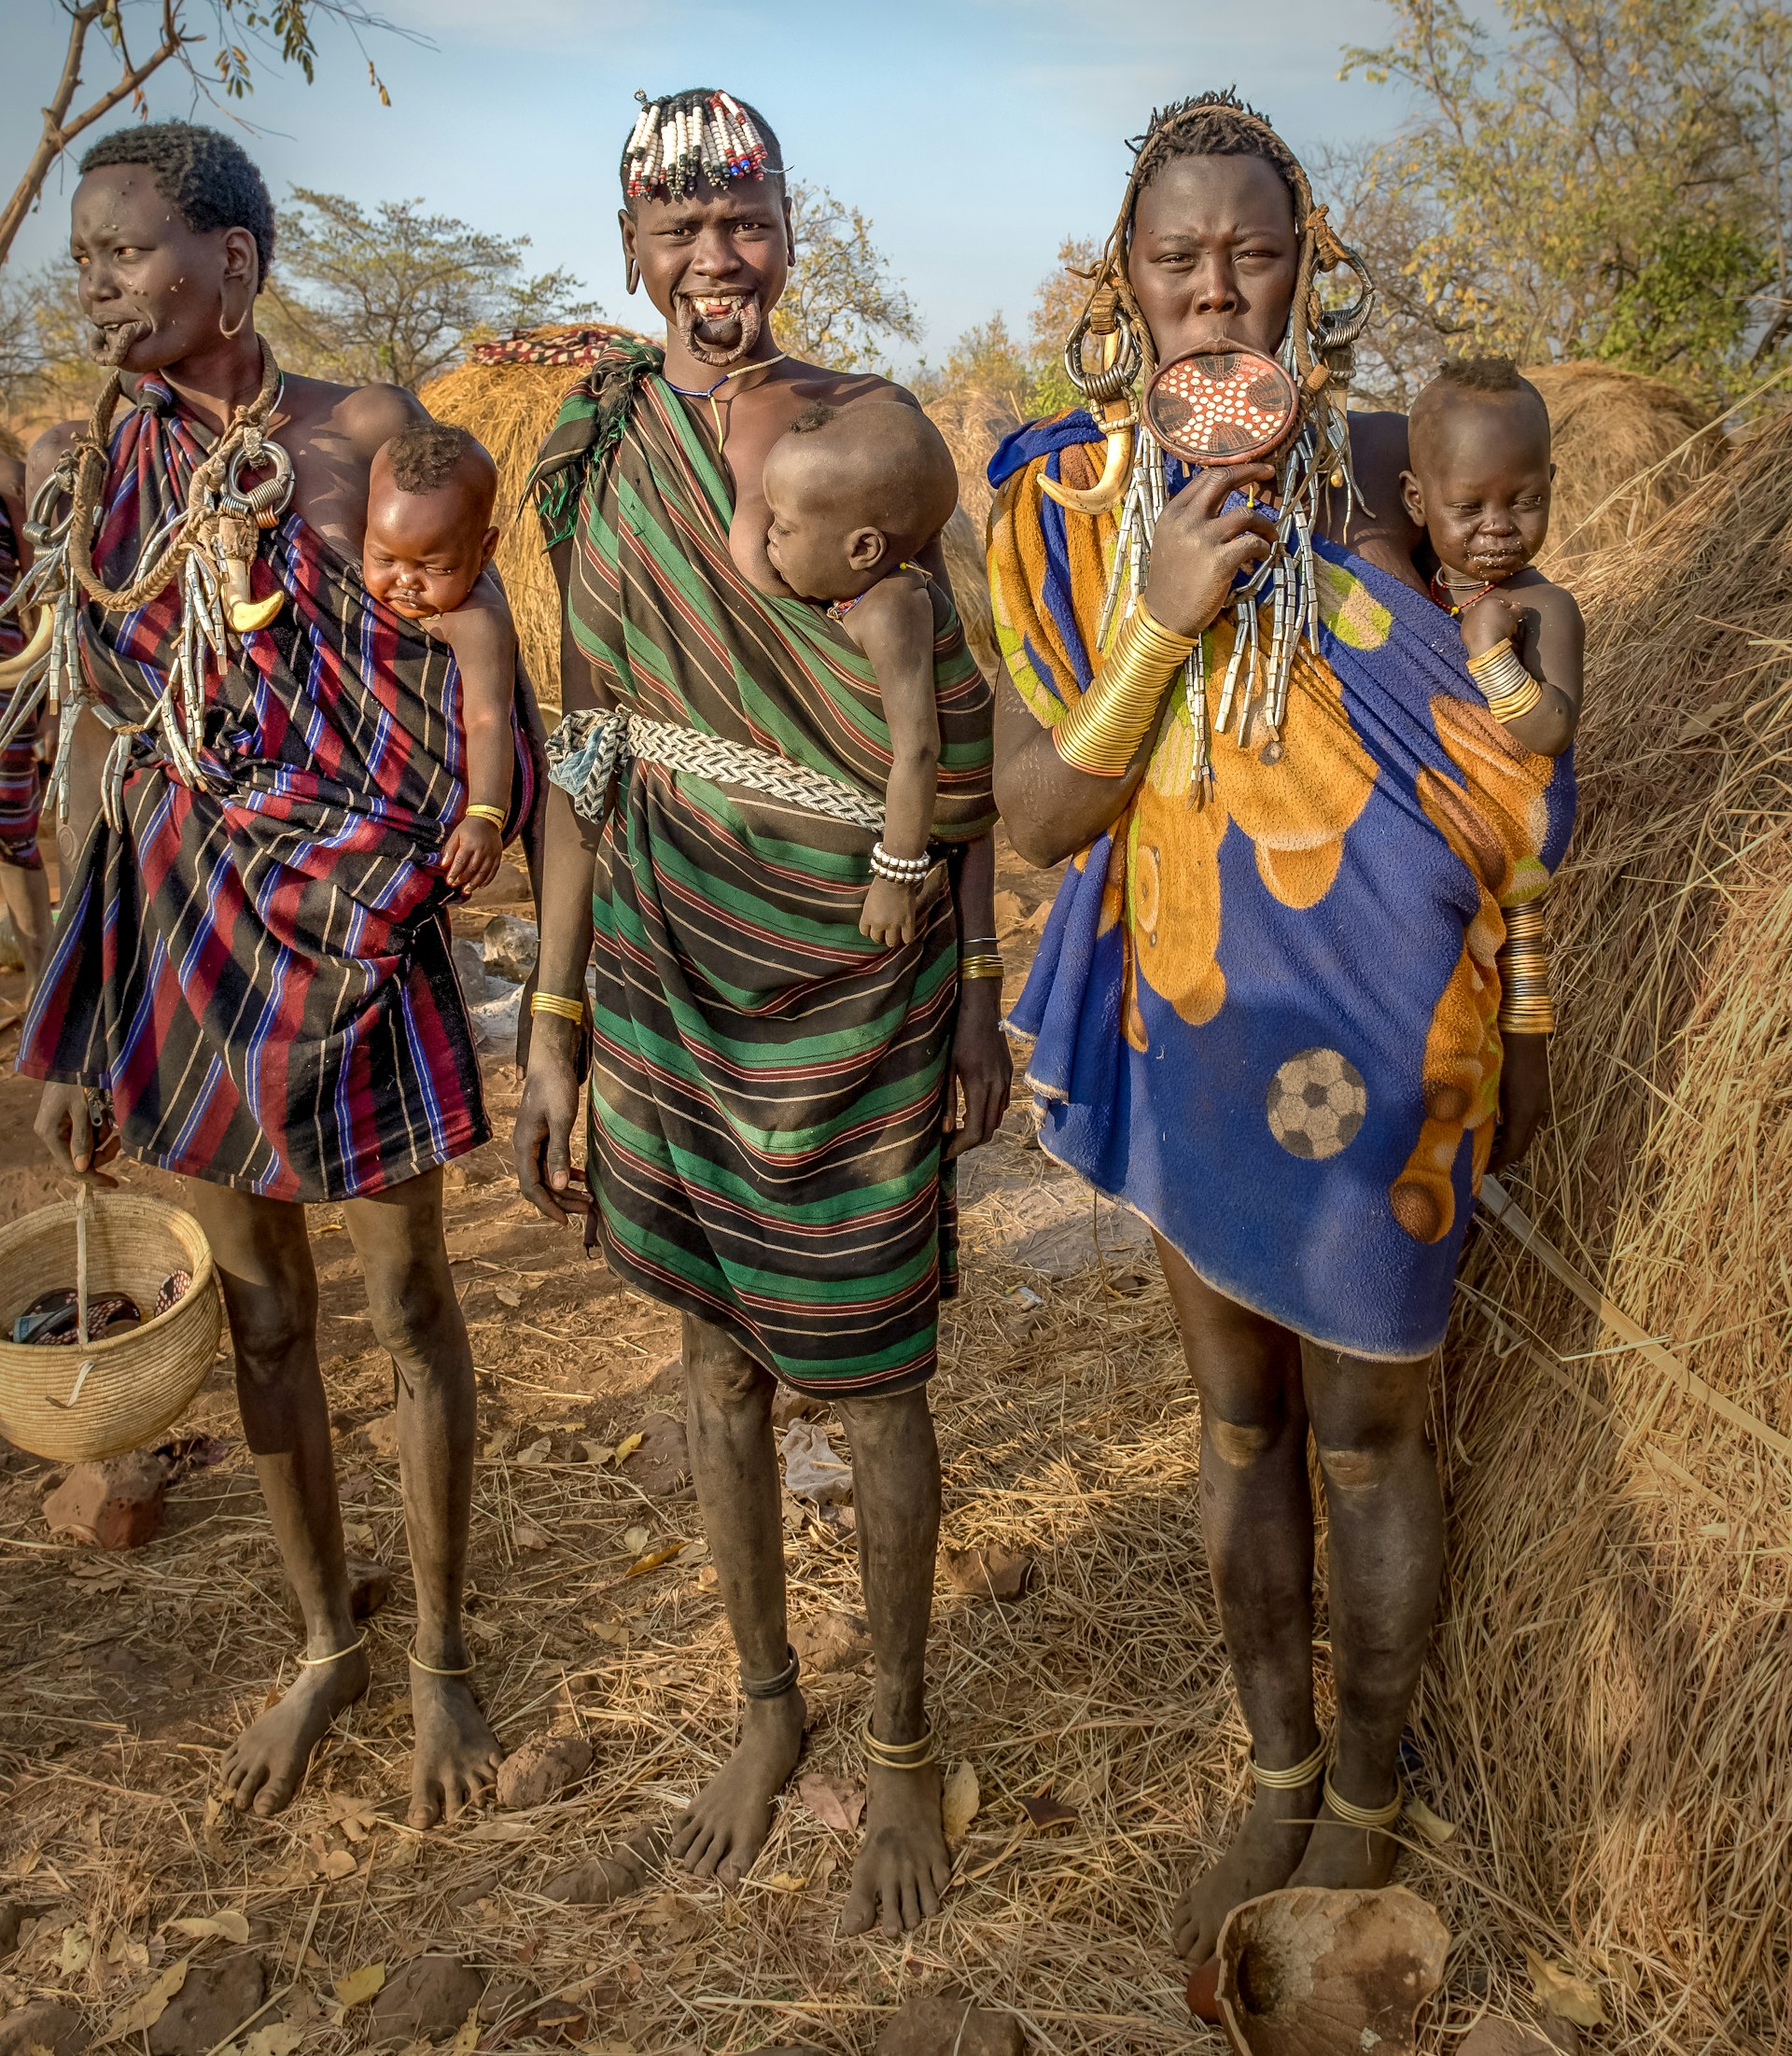 Three tribeswomen, each with a lip plate in their bottom lips, stand together with three infants held in slings across their hips